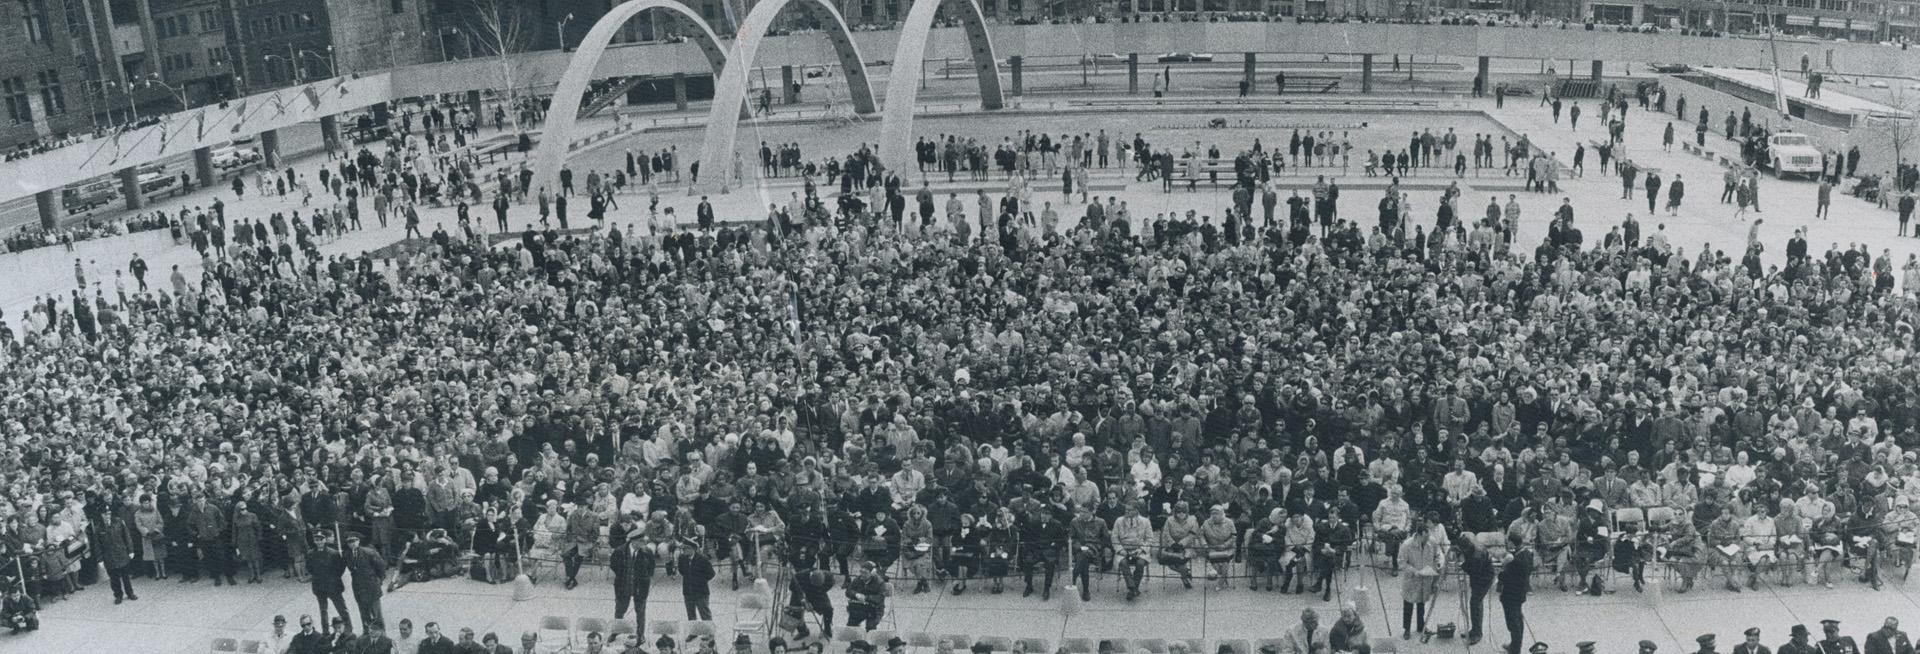 A throng of mourners estimated at 20,000 - school-childen, businessmen, pensioners, housewives, unionists, civil rights leaders and civic officials - (...)